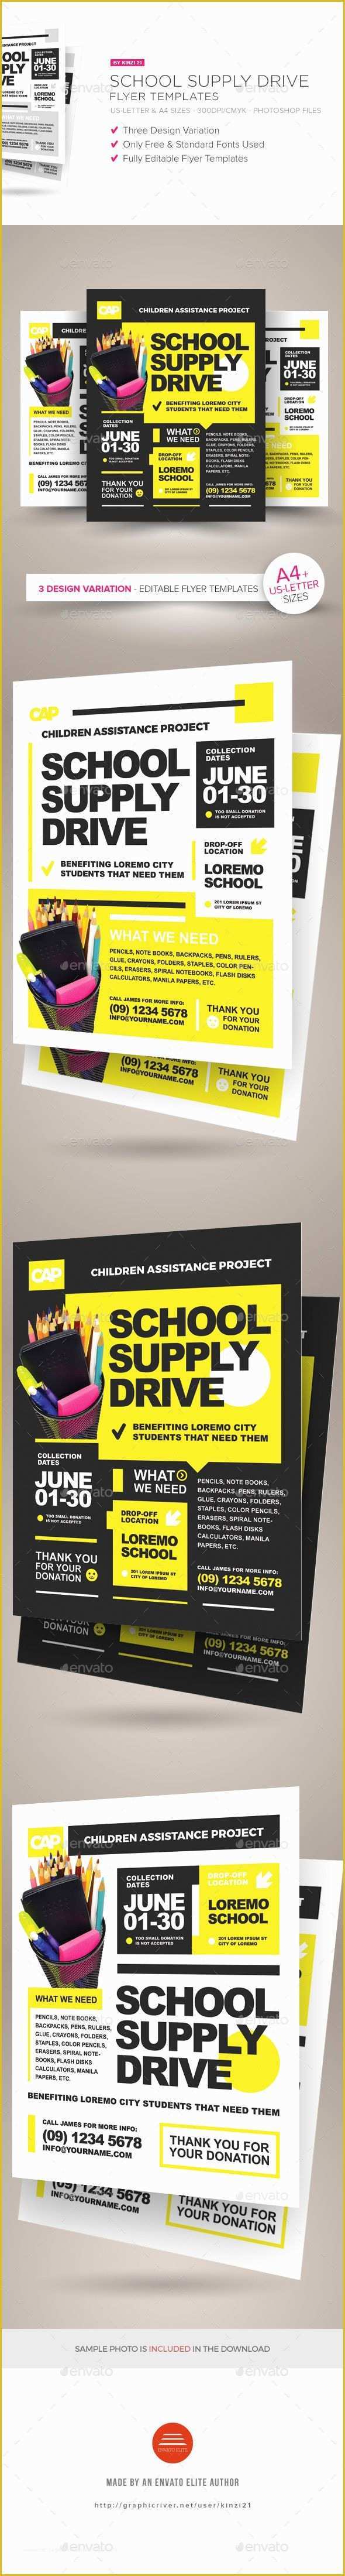 Free School Supply Drive Flyer Template Of 88 Best Images About Service Flyer Templates On Pinterest